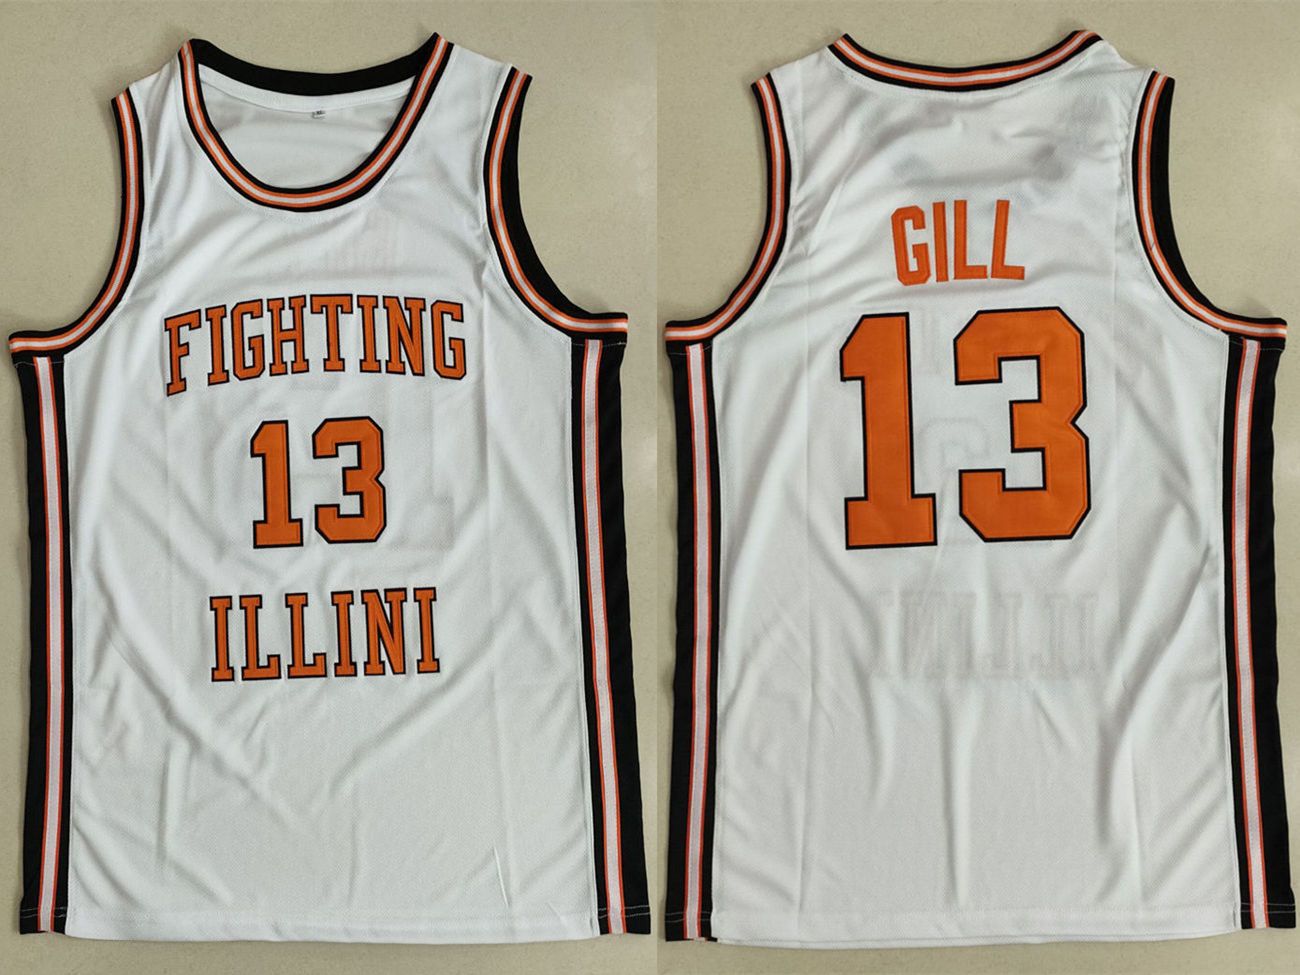 kendall gill jersey